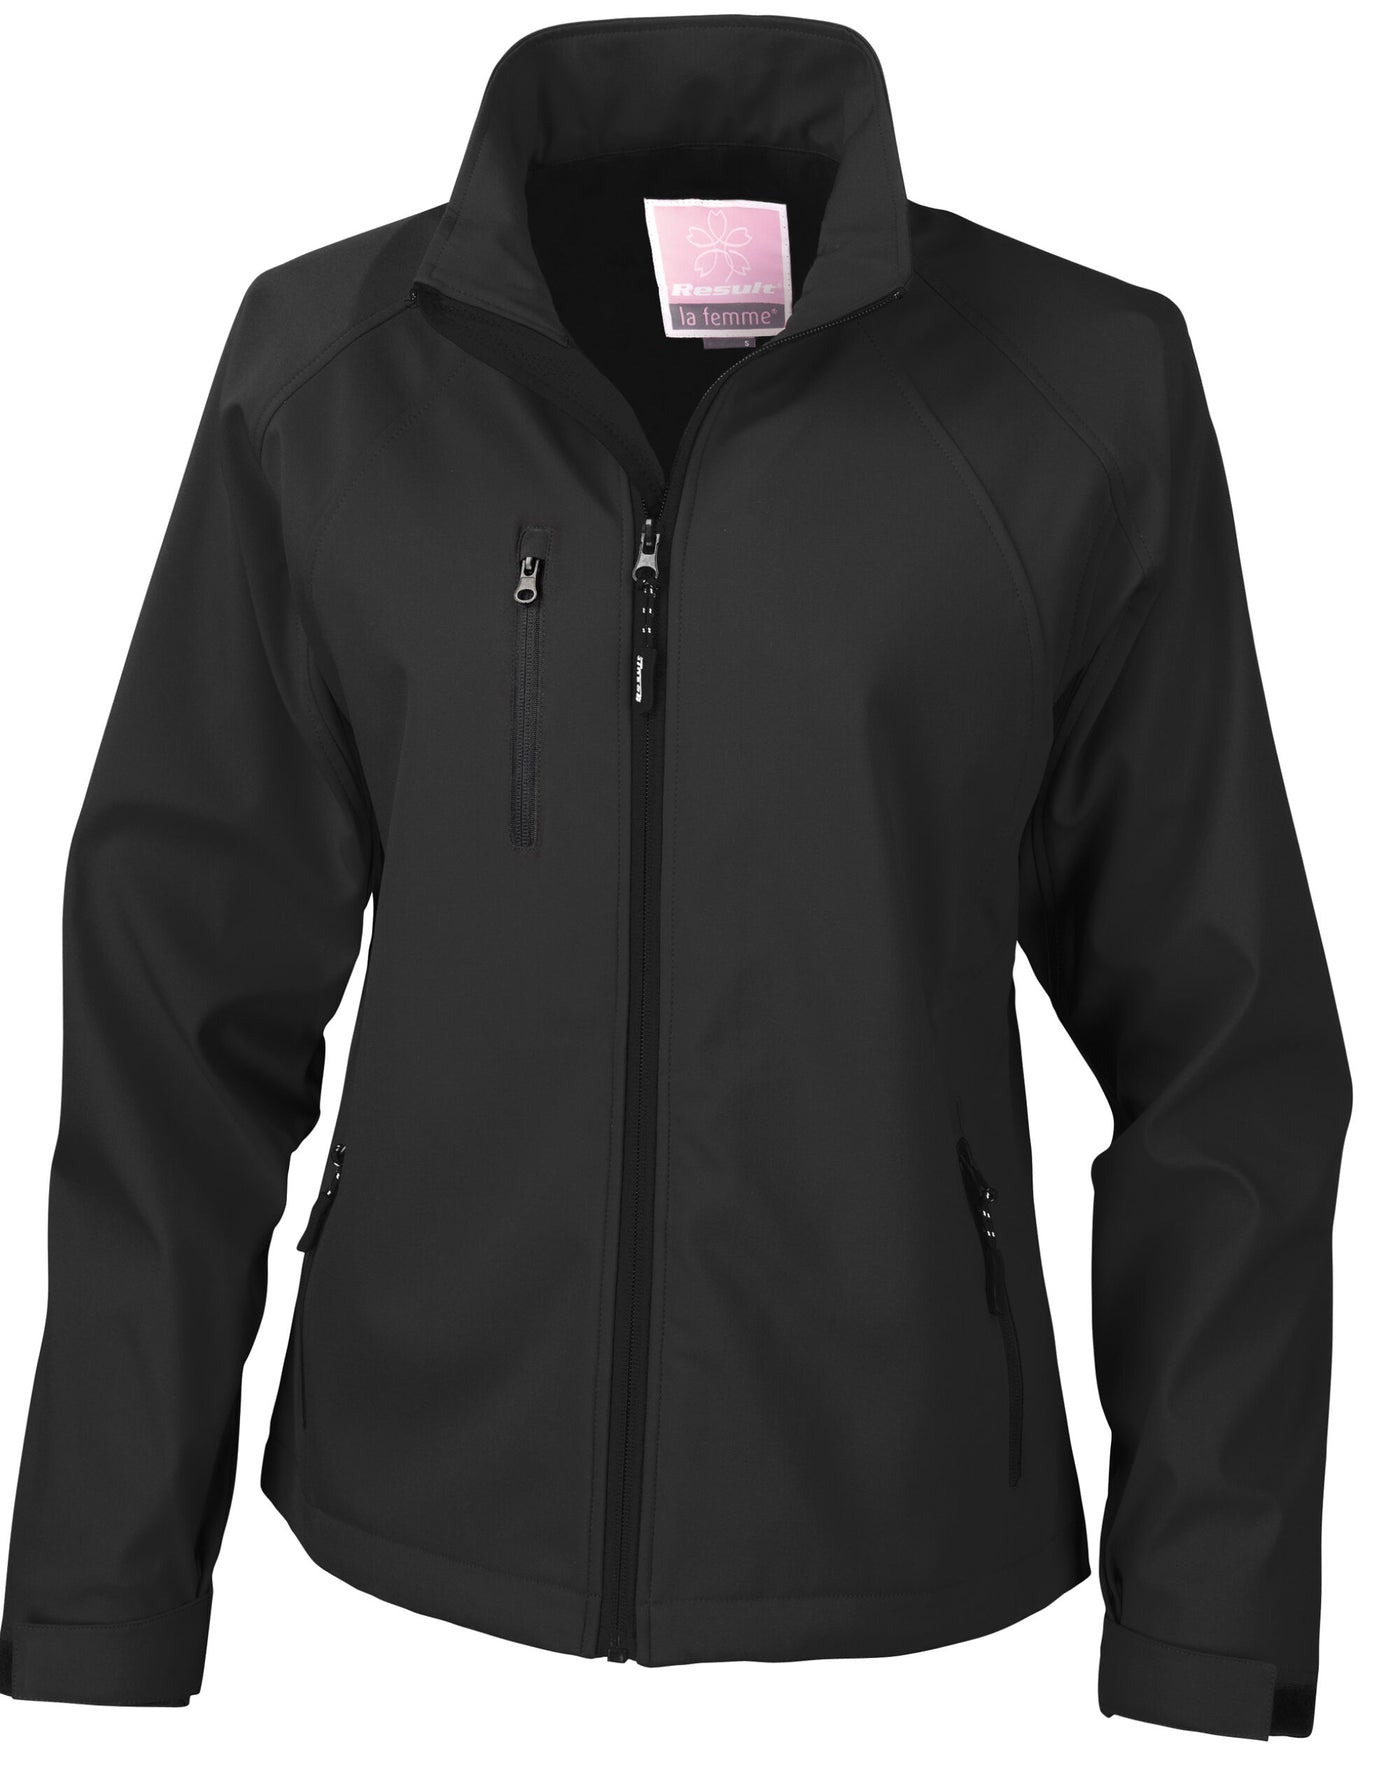 Ladies Soft Shell Jacket in Black